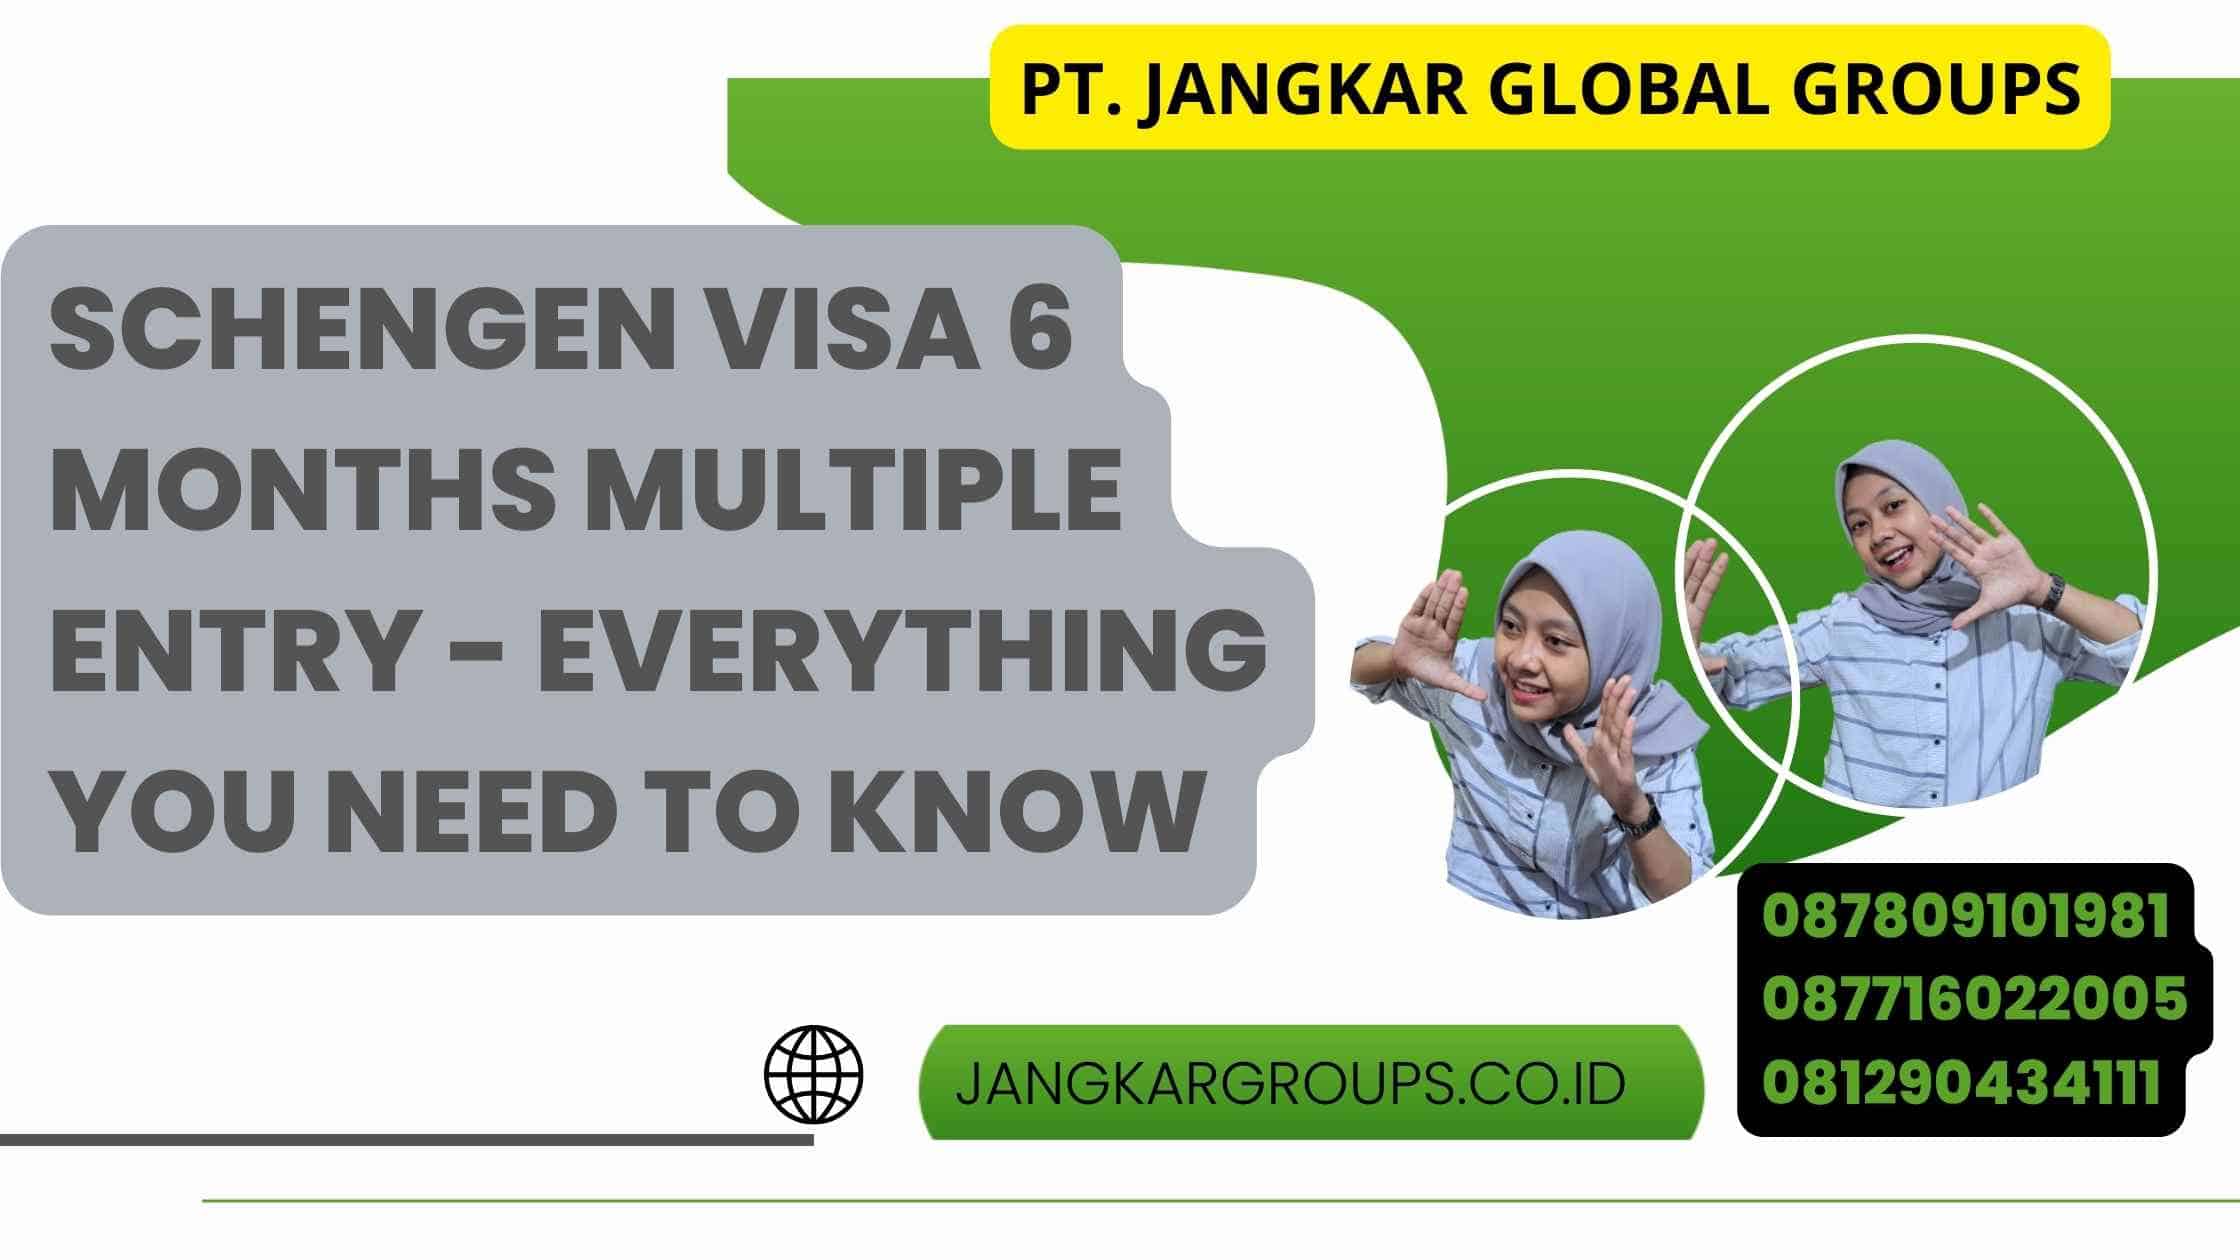 Schengen Visa 6 Months Multiple Entry - Everything You Need to Know